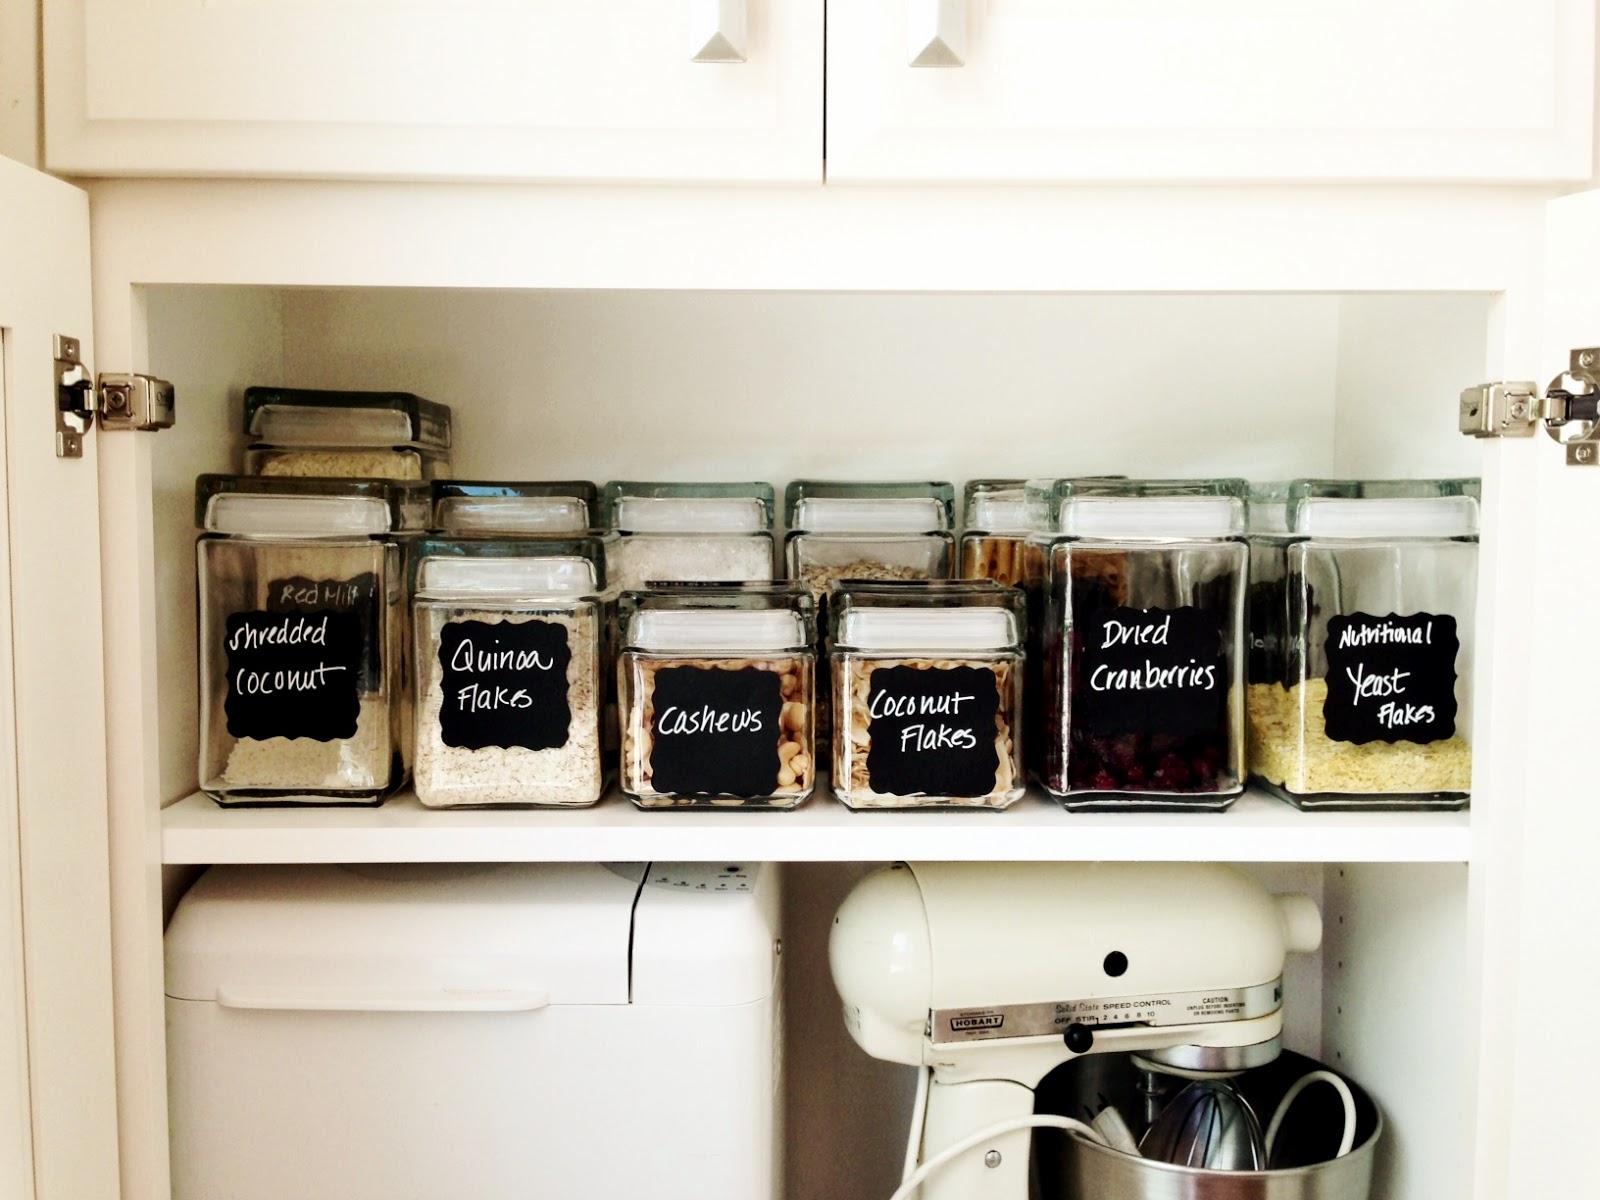  These Kitchen Organization Hacks Will Save You Time And Energy